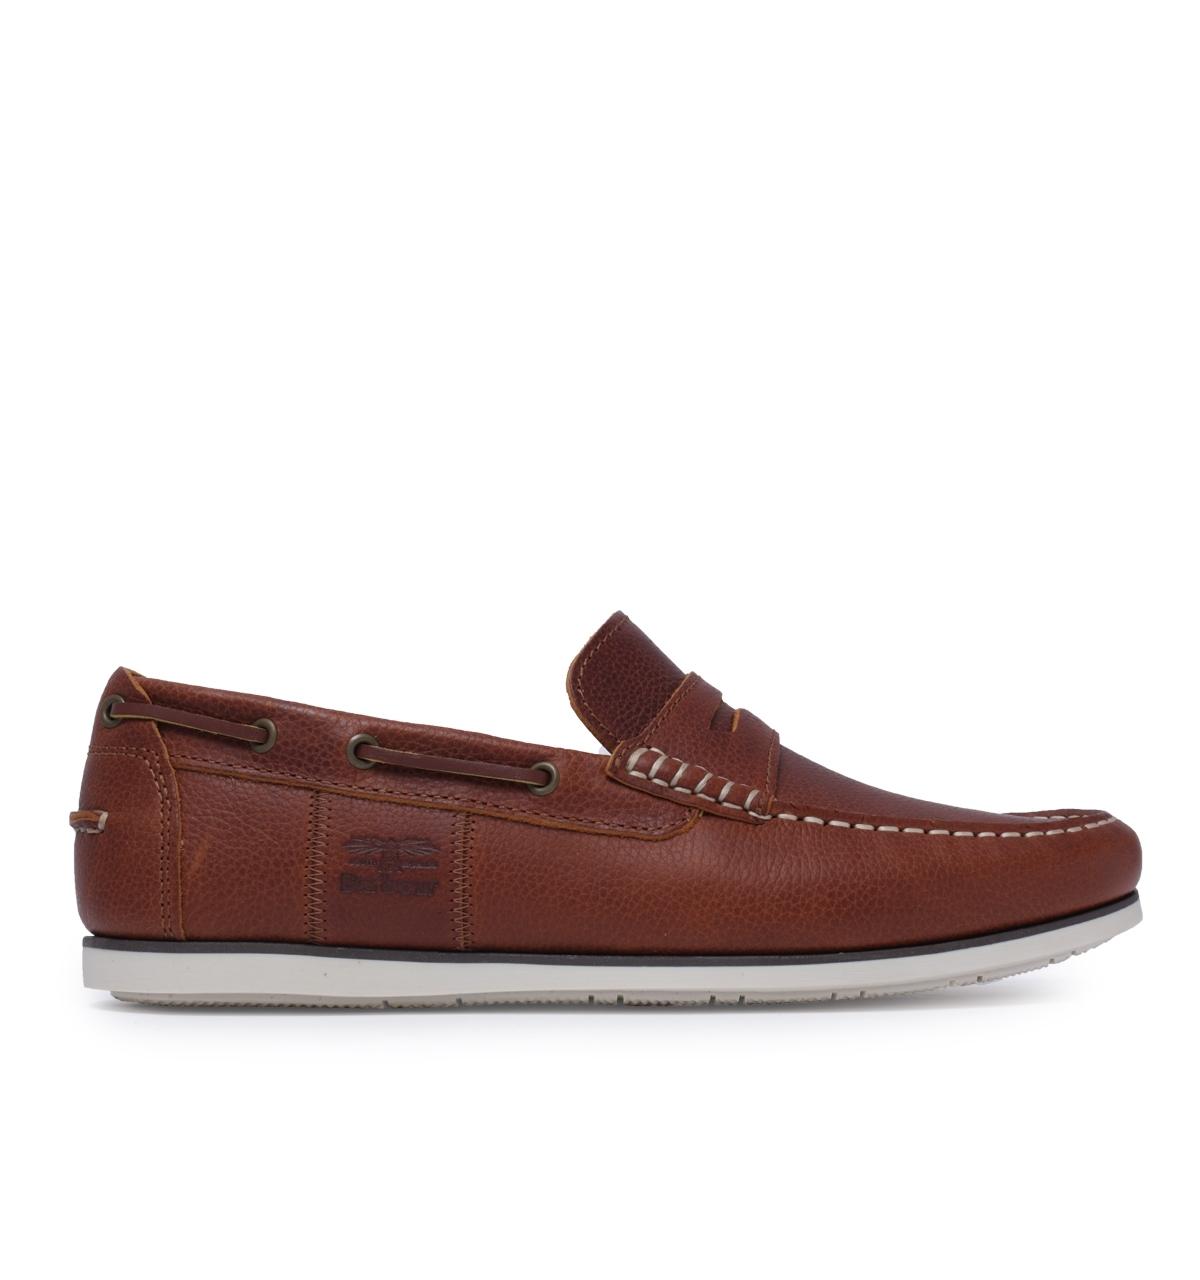 Barbour Barbour Keel Cognac Brown Leather Boat Shoes for Men | Lyst